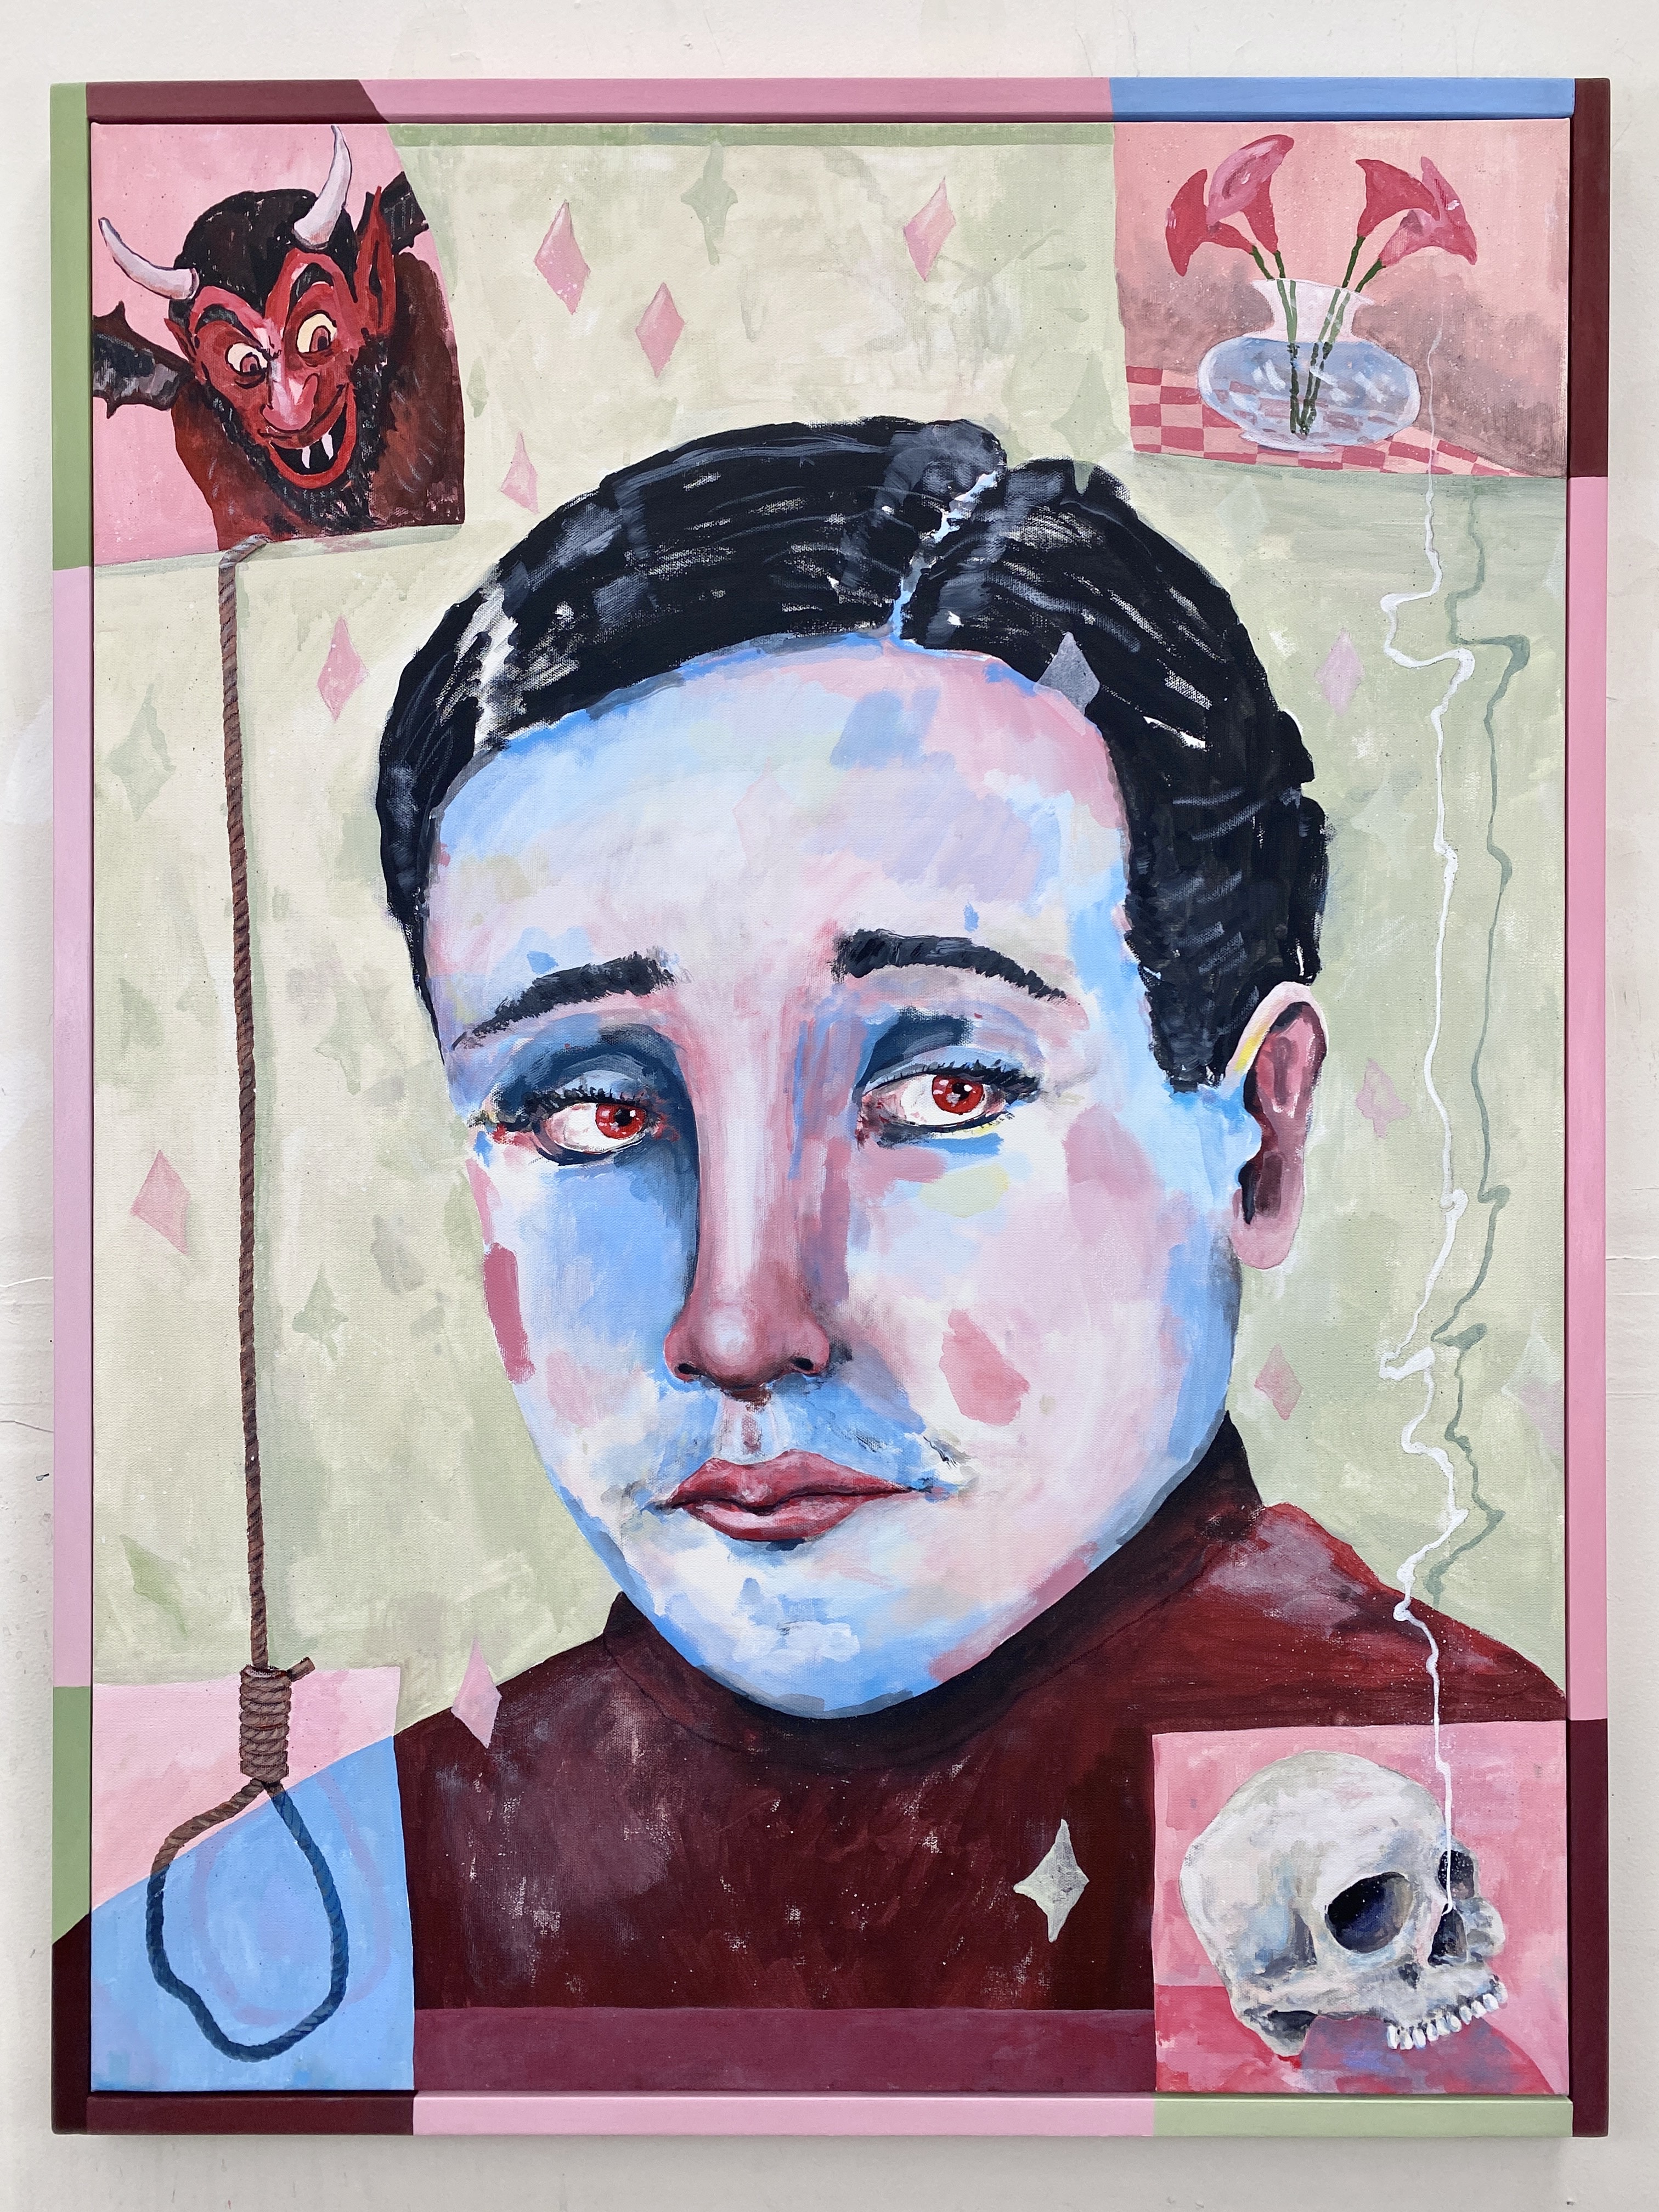 A cartoonish portrait of a blue skinned man with red eyes, with a devil in the upper left corner, flowers in the upper right, a noose on the lower left, and a skull on the lower right